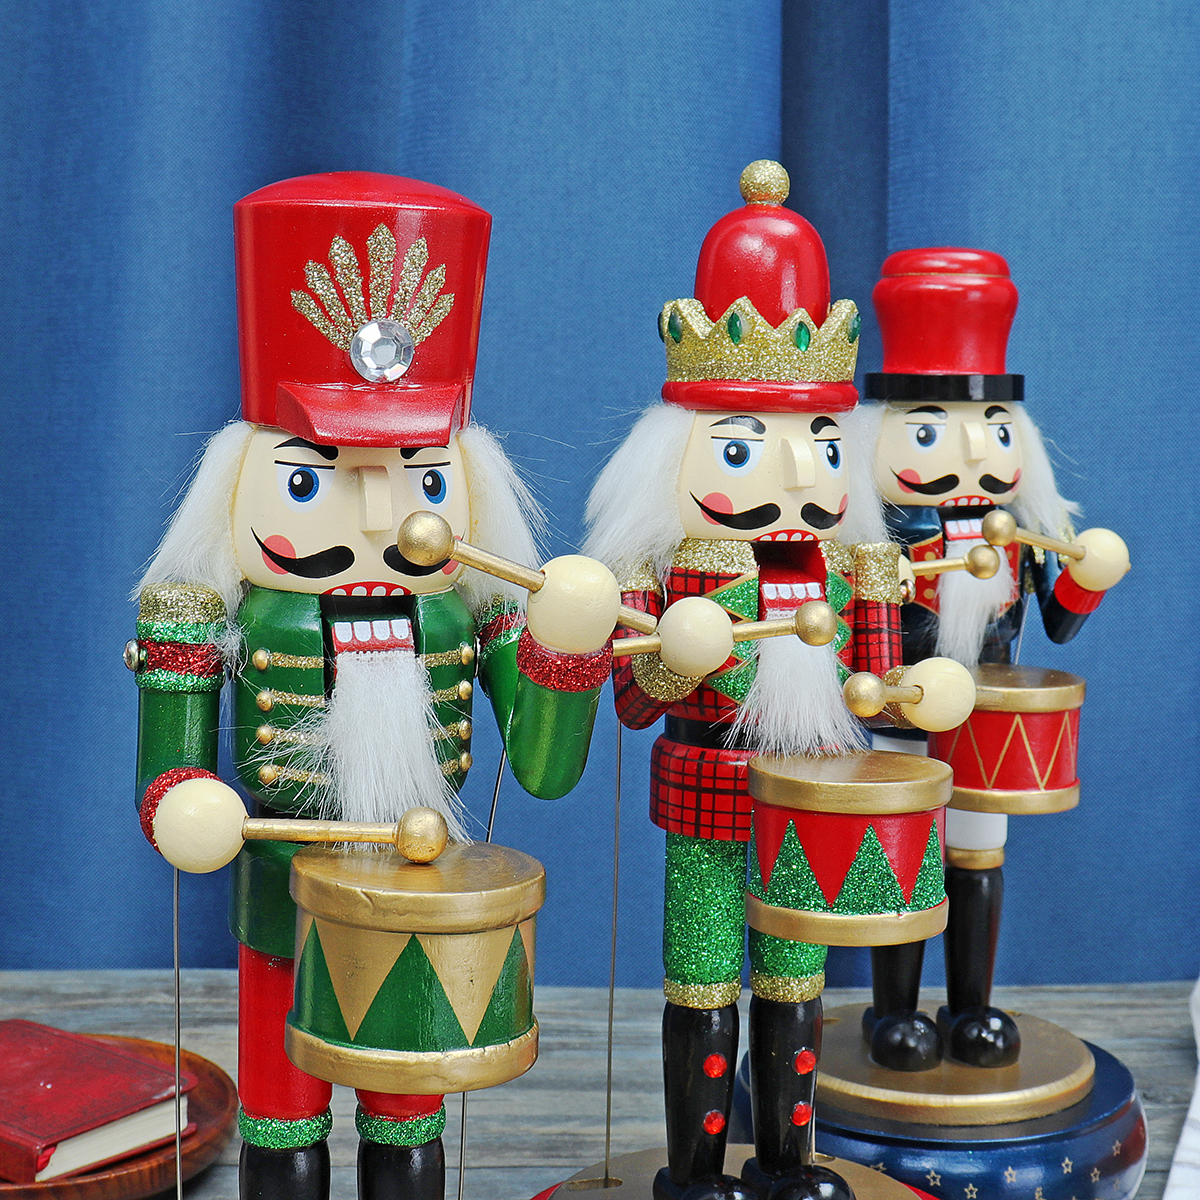 32CM-Wooden-Guard-Nutcracker-Soldier-Toy-Music-Box-Christmas-Decorations-Xmas-Gift-1605612-5